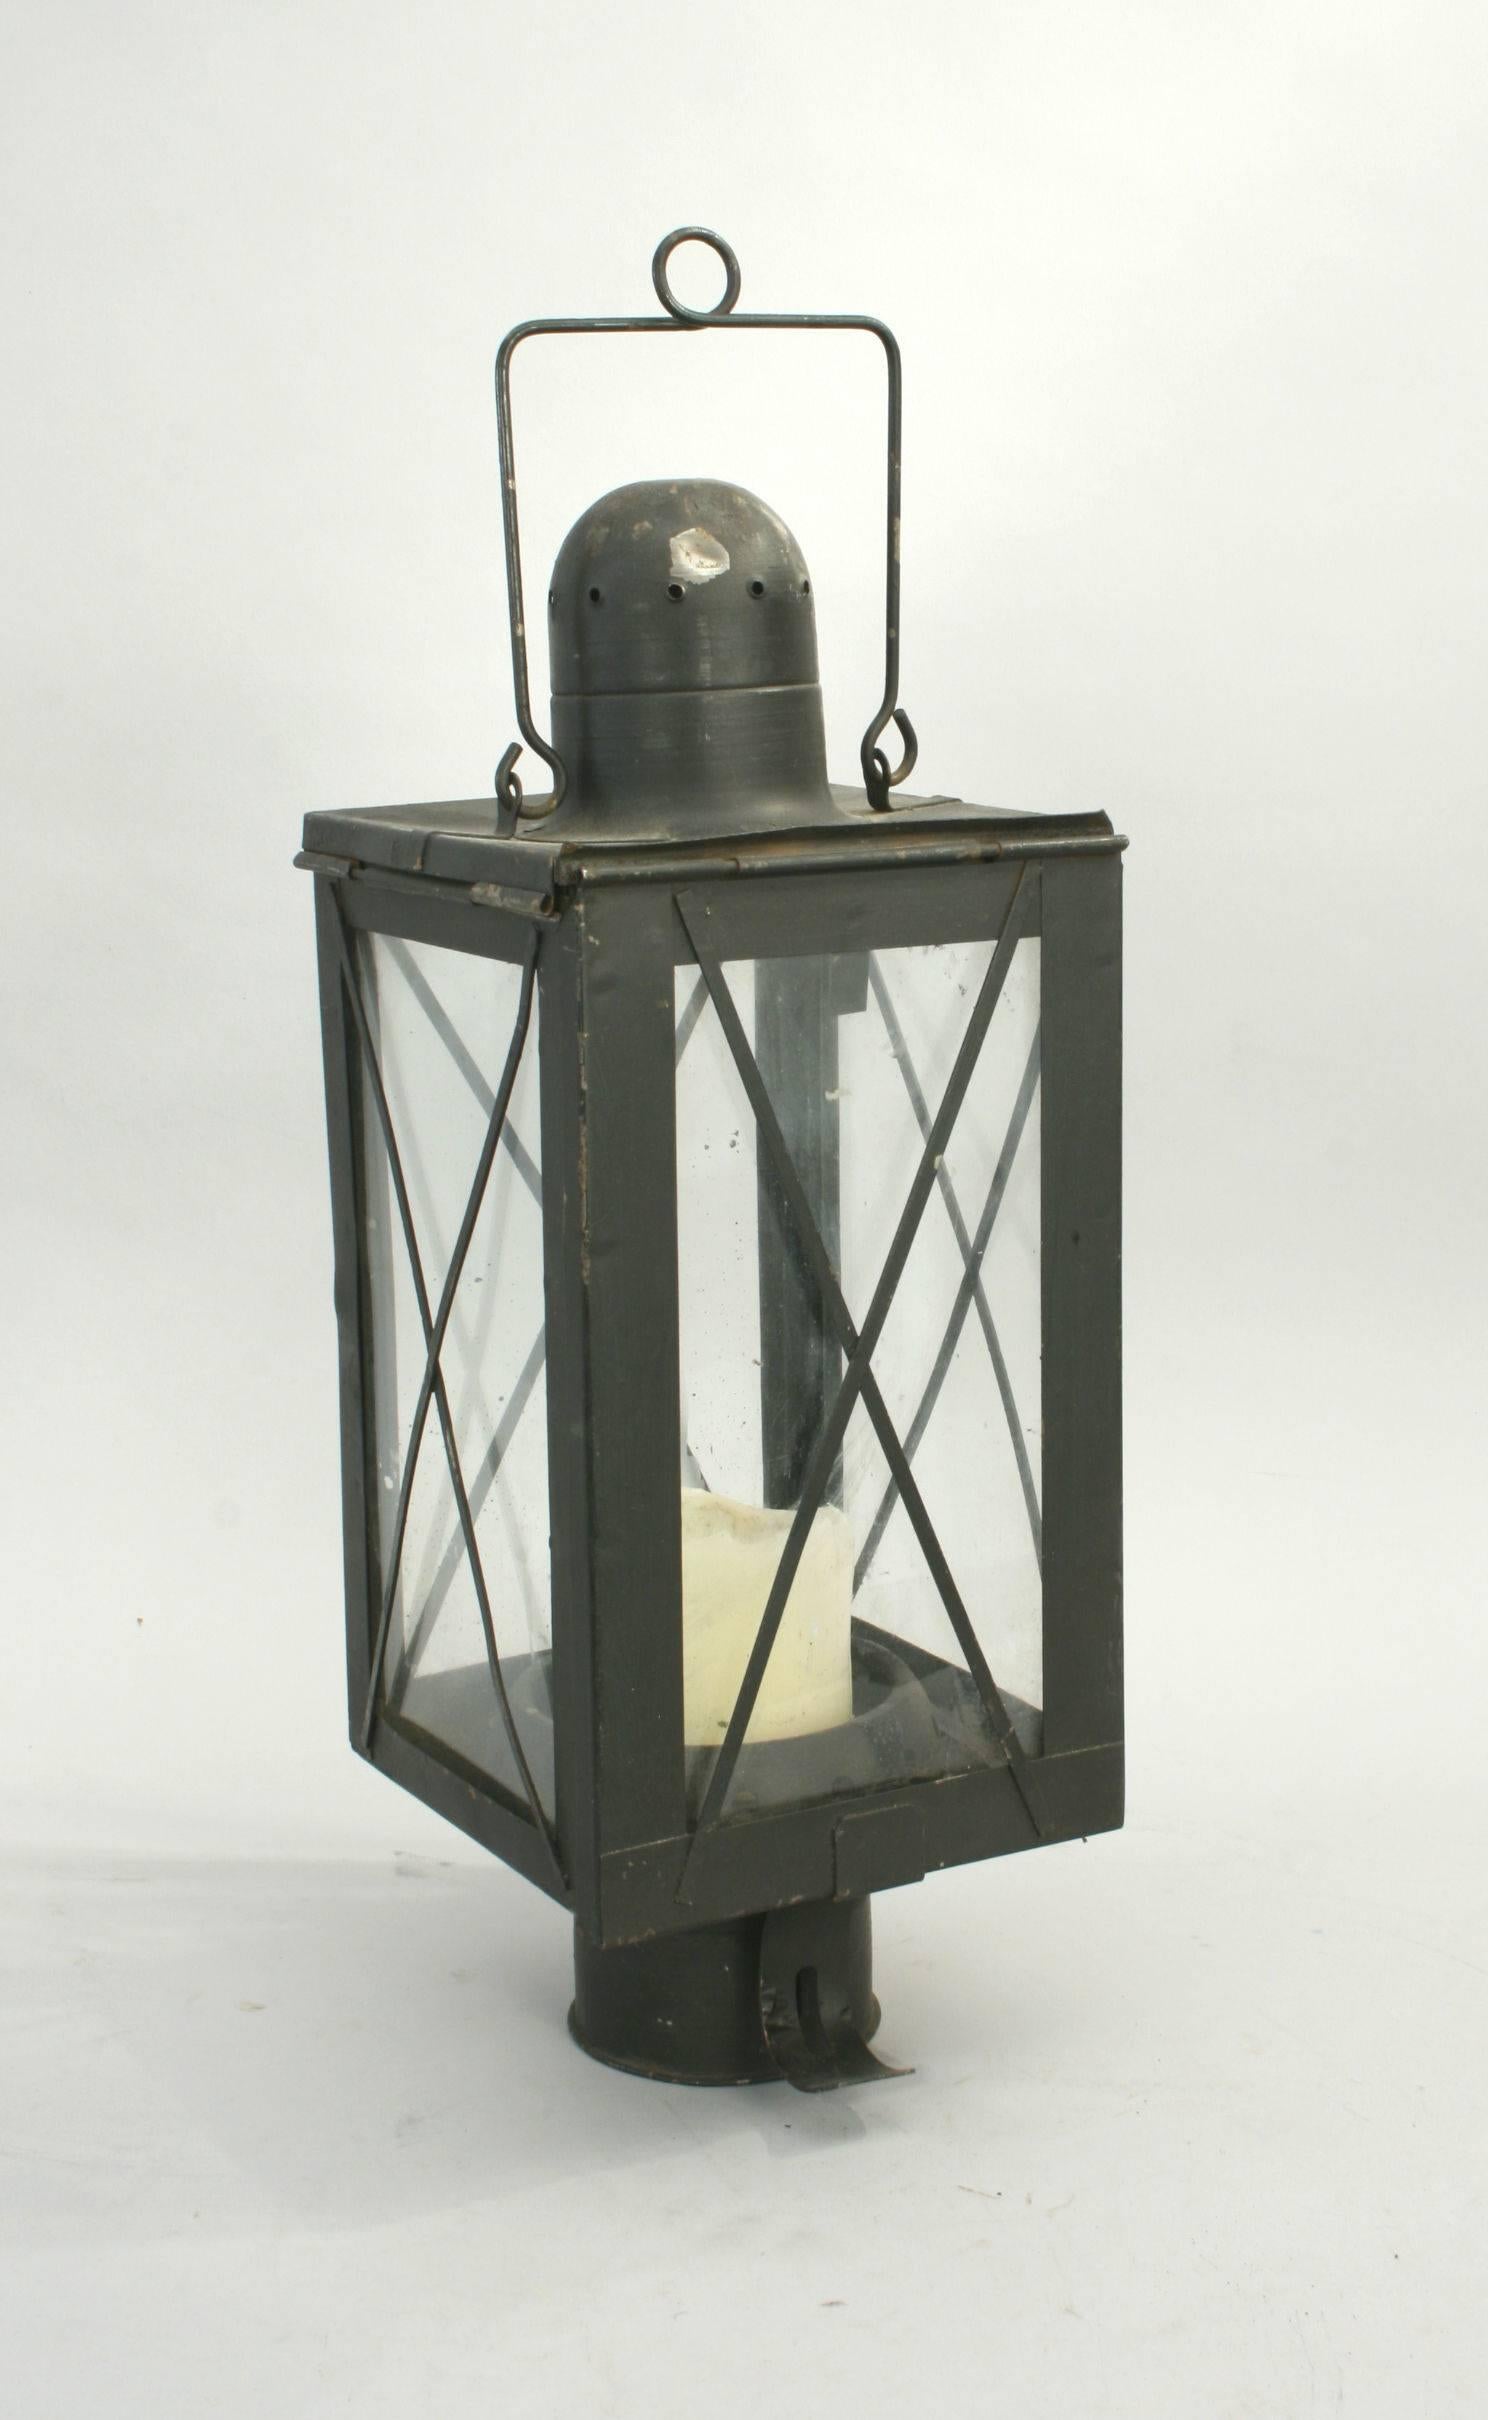 Vintage metal lantern.
A good metal lantern with a black paint finish. The candle flame is protected by glass panels on all four sides. There is a hinged door to the front and a carry handle to the top. The glass is protected by diagonal metal